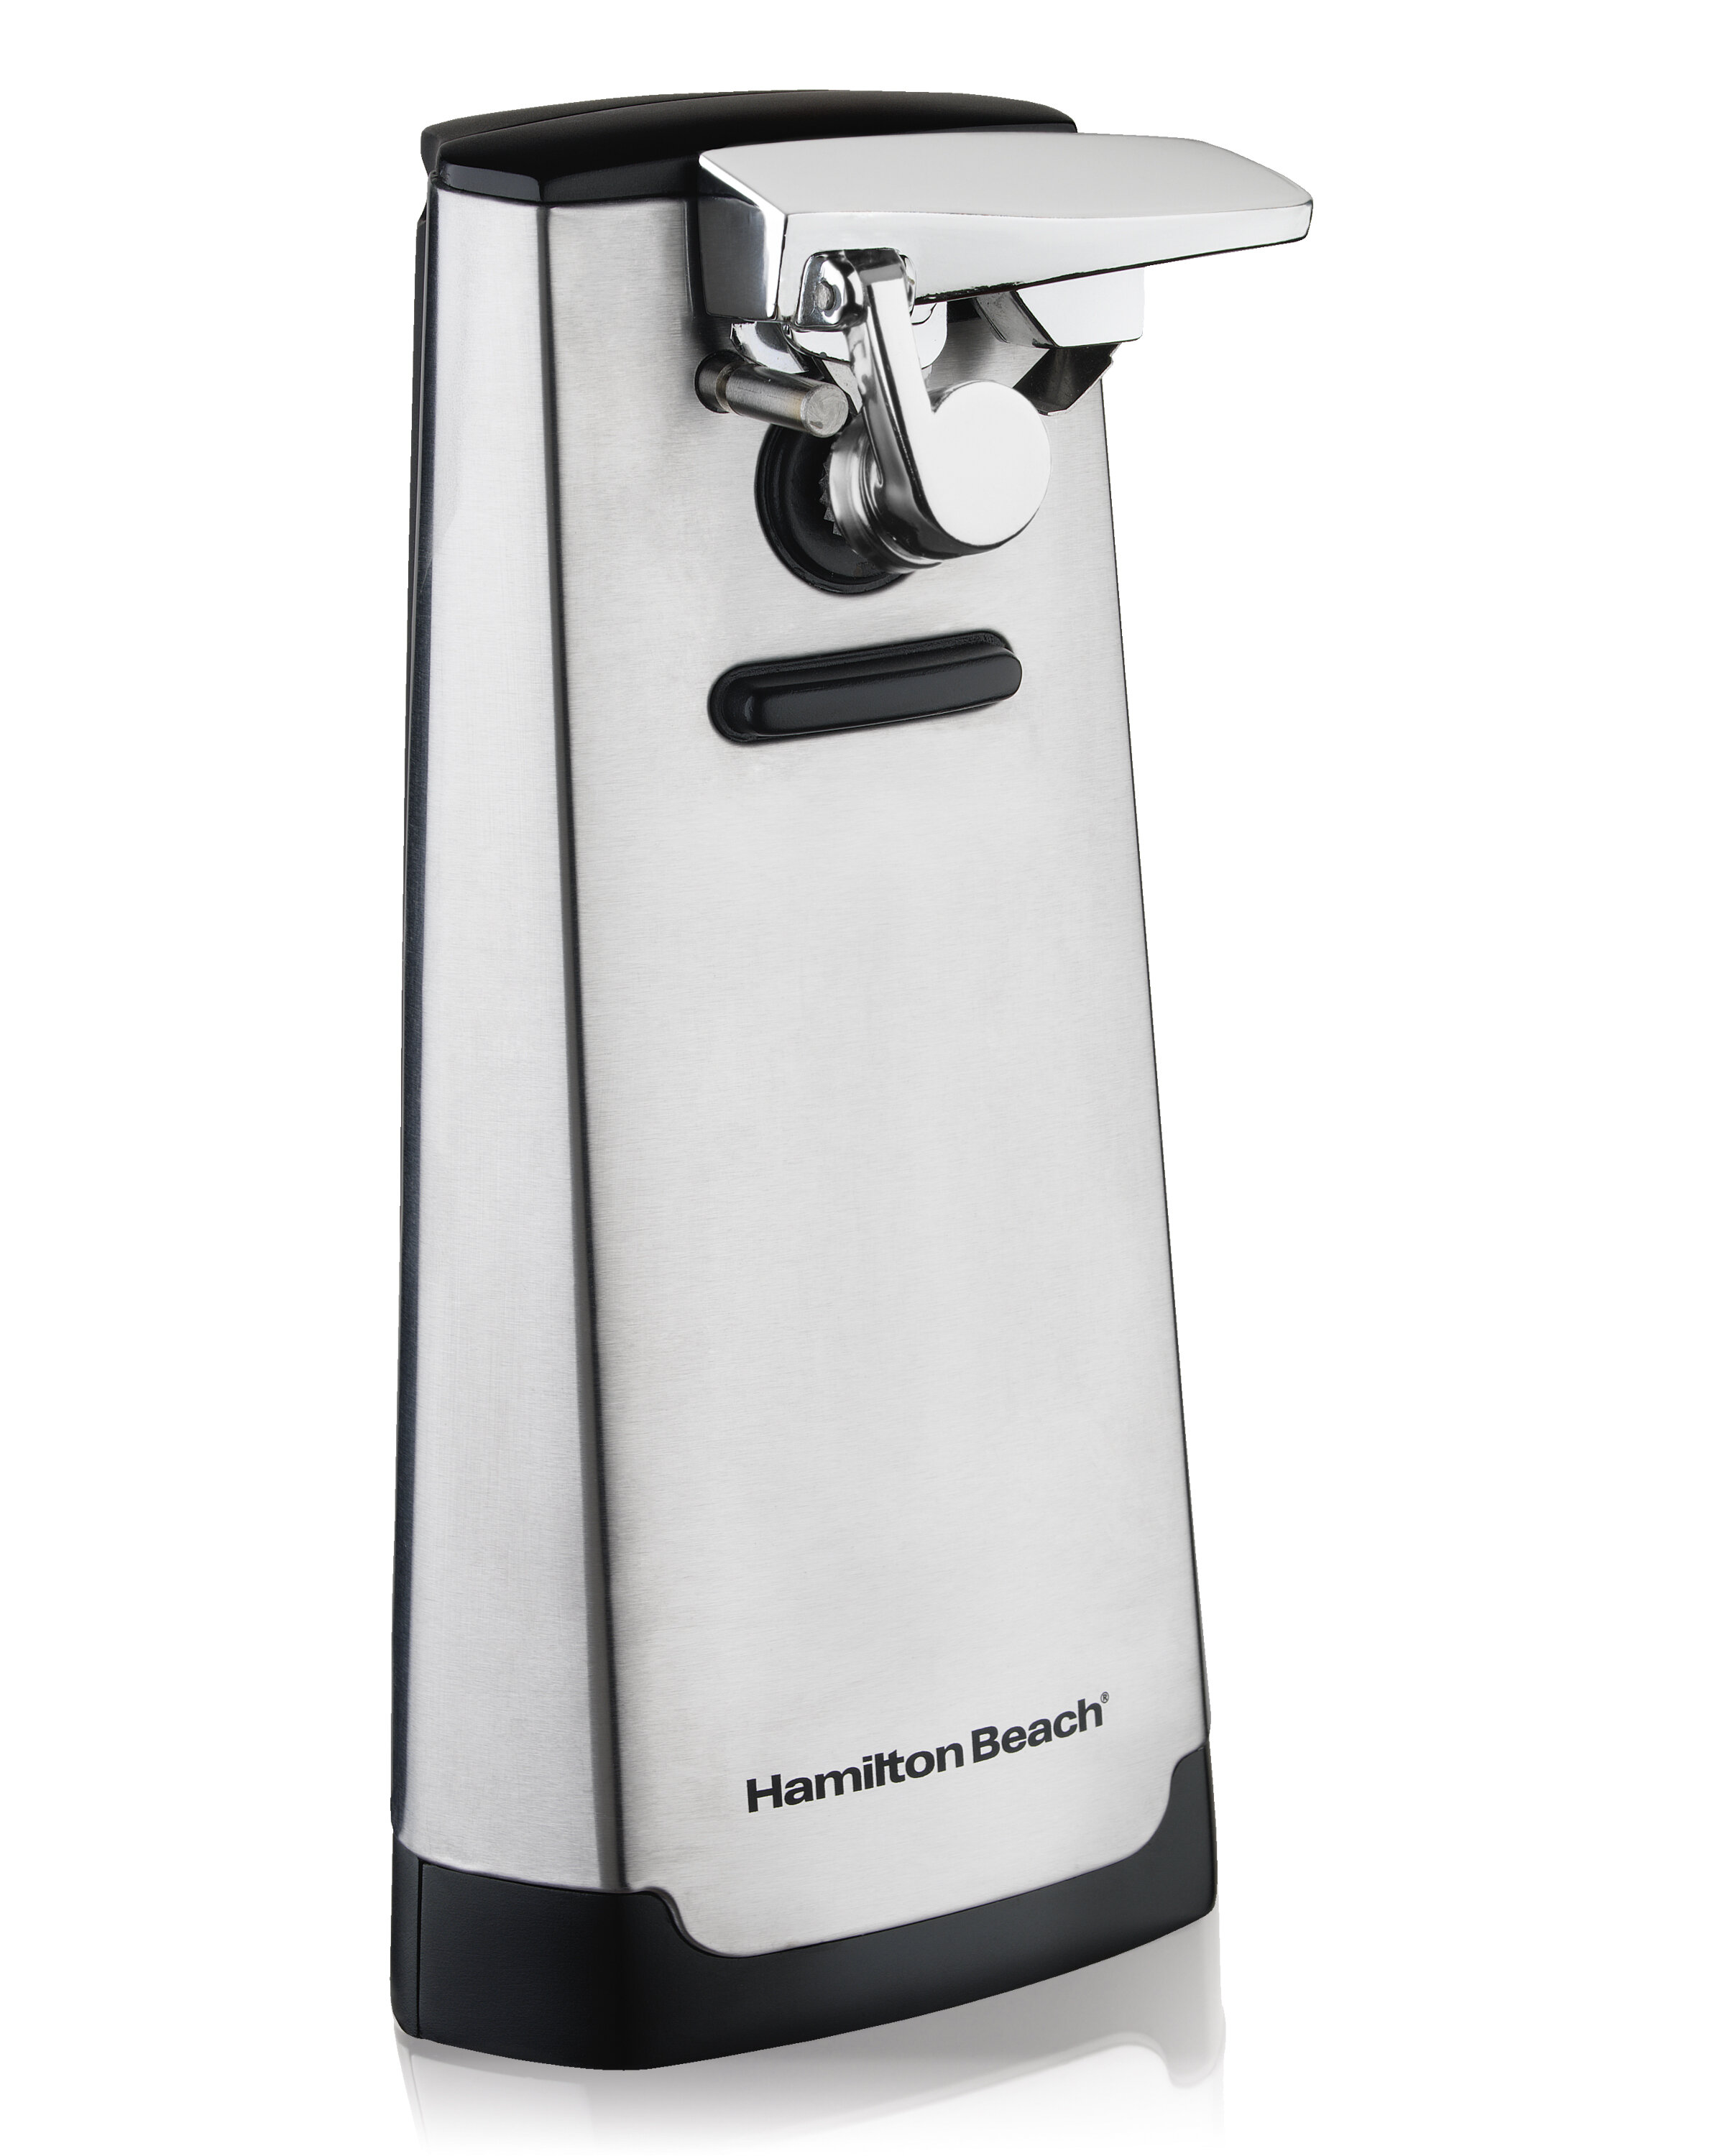 Tall Electric Can Opener with Knife Sharpener & Bottle Opener, White